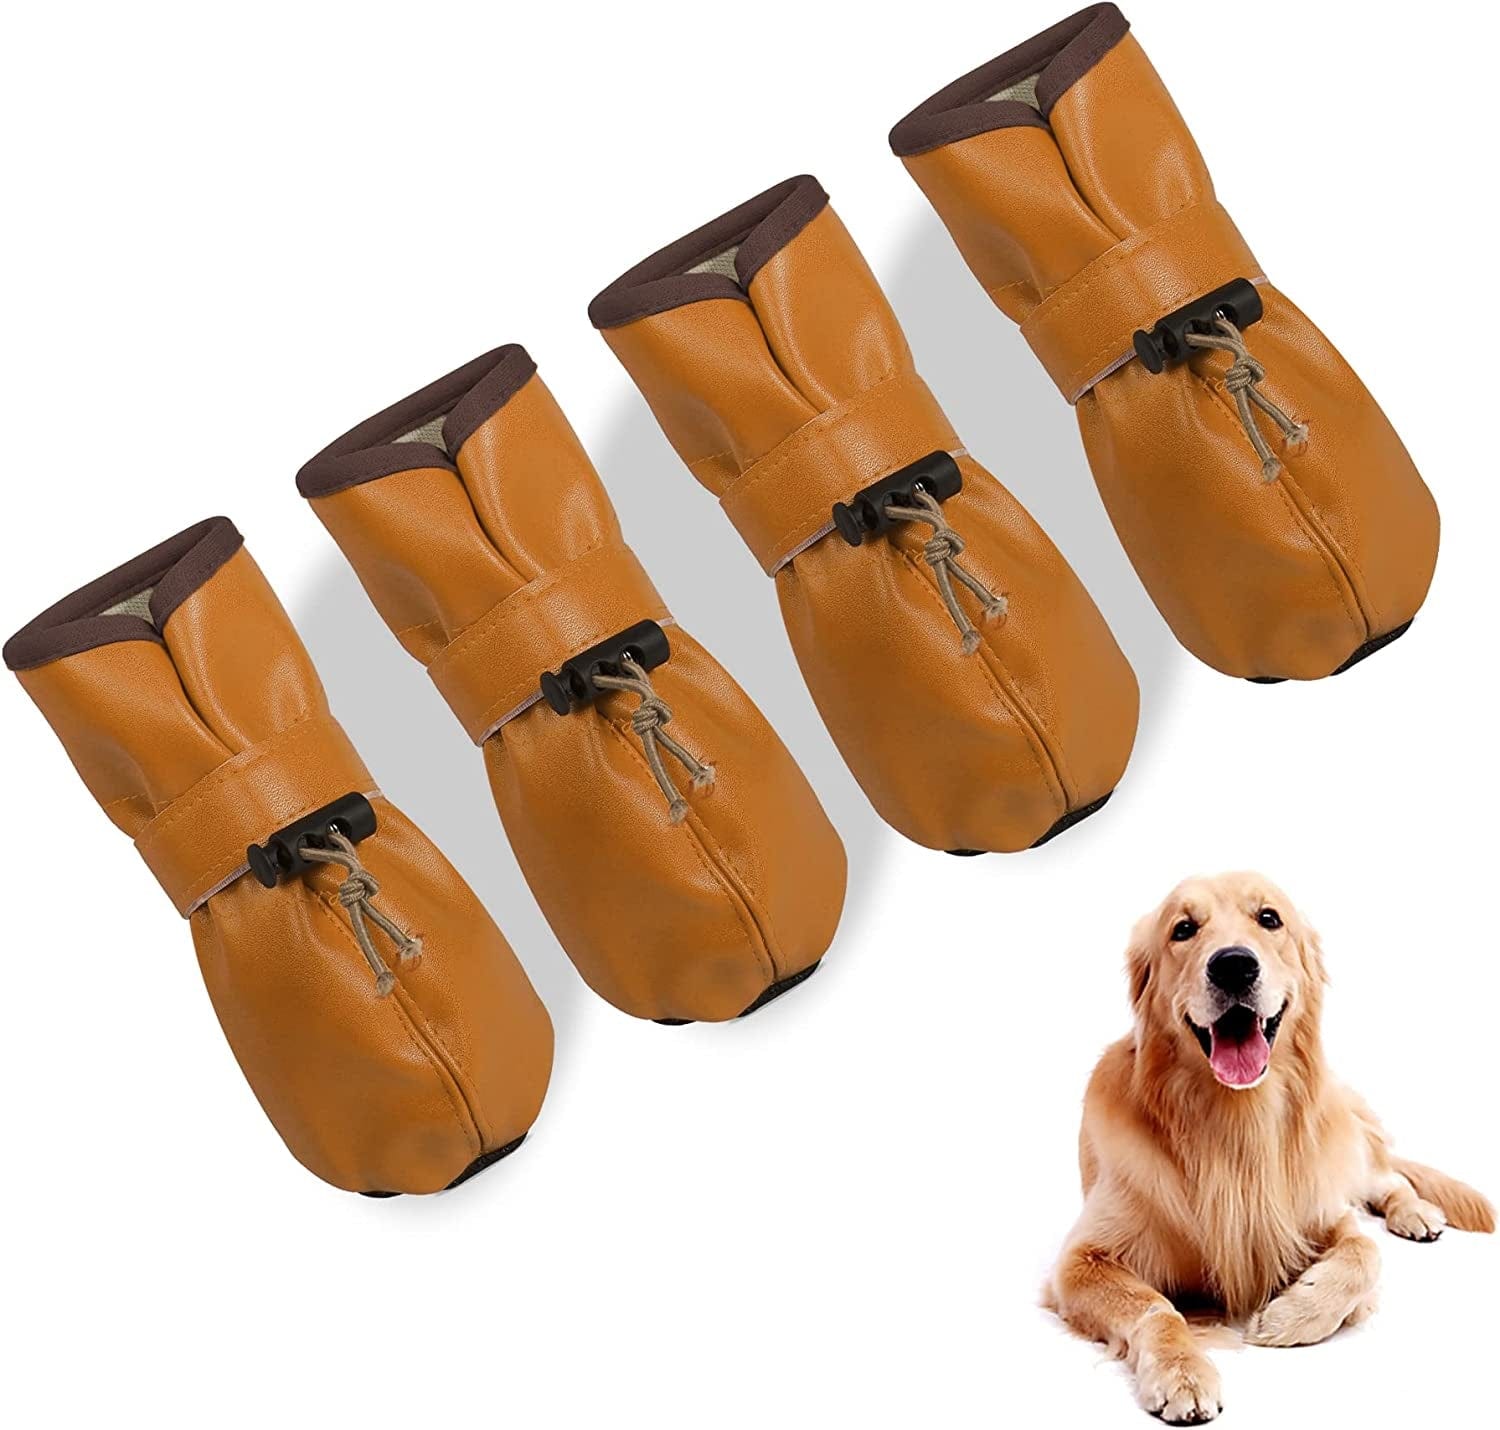 YAODHAOD Dog Shoes for Large Dogs, Dog Boots Paw Protectors for Hot Pavement, Leather Anti-Slip Adjustable Booties,For Indoor Hardwood Floor Traction Control & Outdoor Wlaking Hikin (Size 8, Black) Animals & Pet Supplies > Pet Supplies > Dog Supplies > Dog Apparel YAODHAOD Brown Size 8: 3"x2.5"(L*W) 